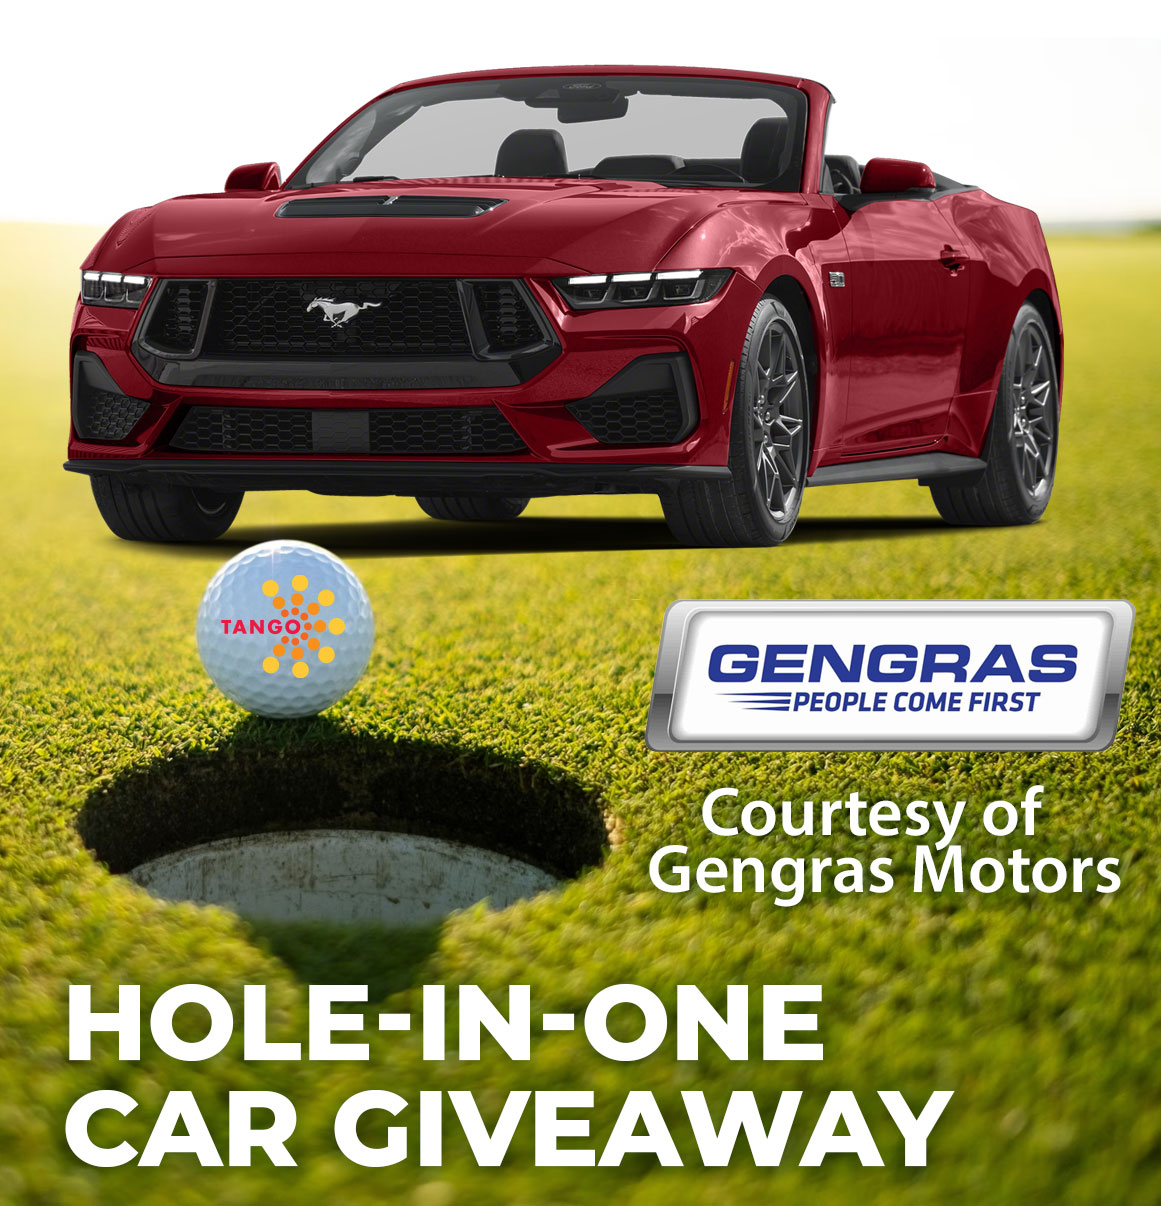 Gengras Hole-in-One Car Giveaway!